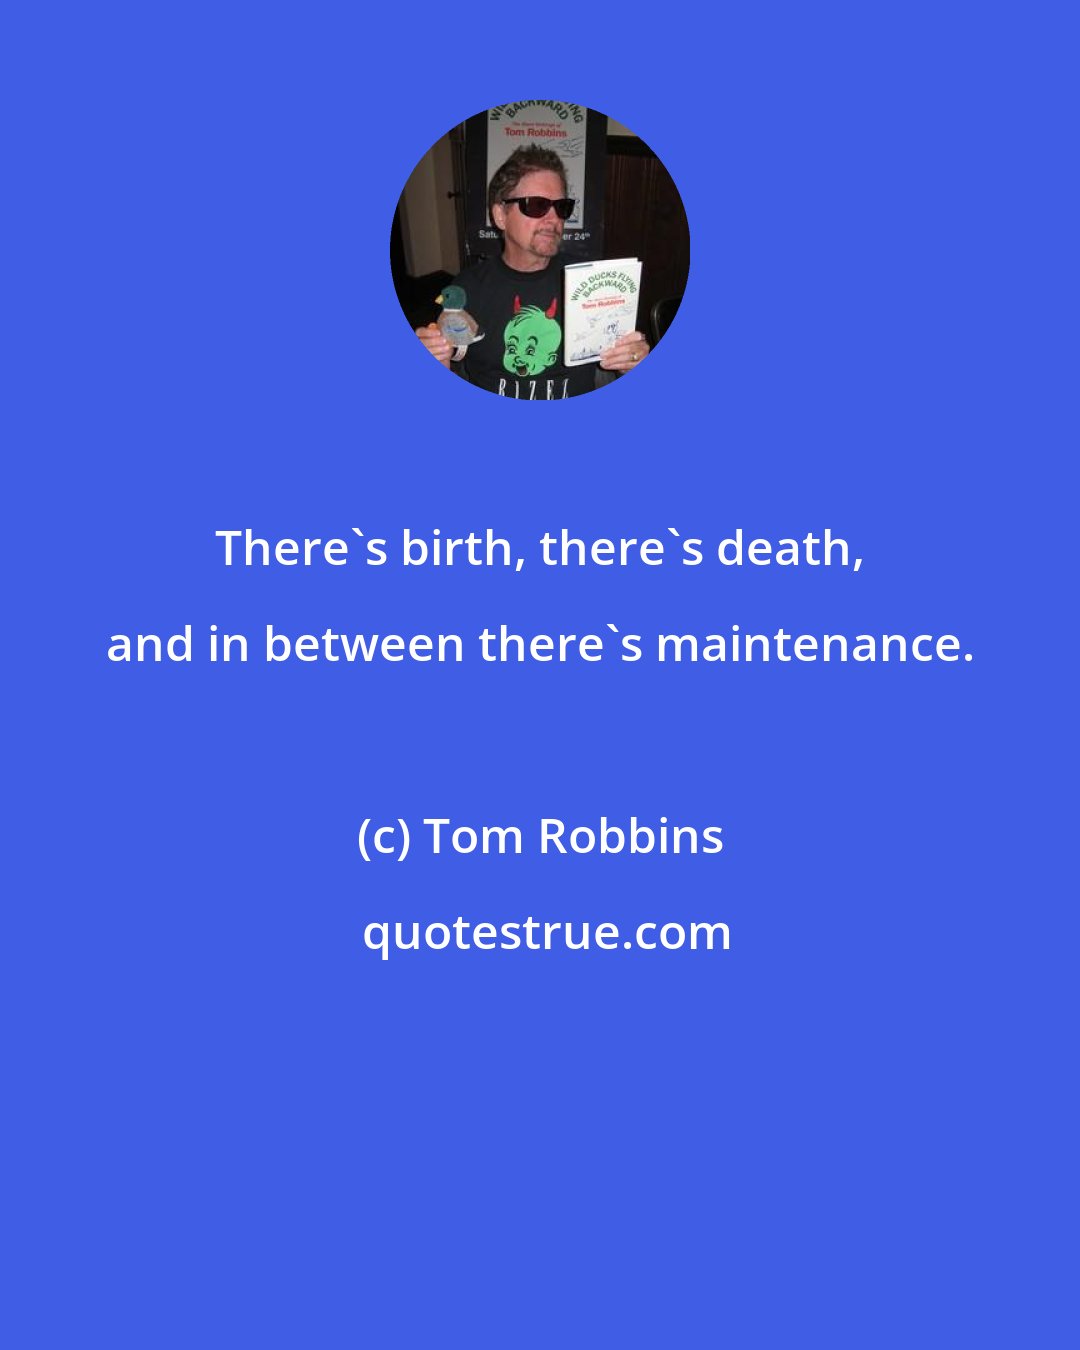 Tom Robbins: There's birth, there's death, and in between there's maintenance.